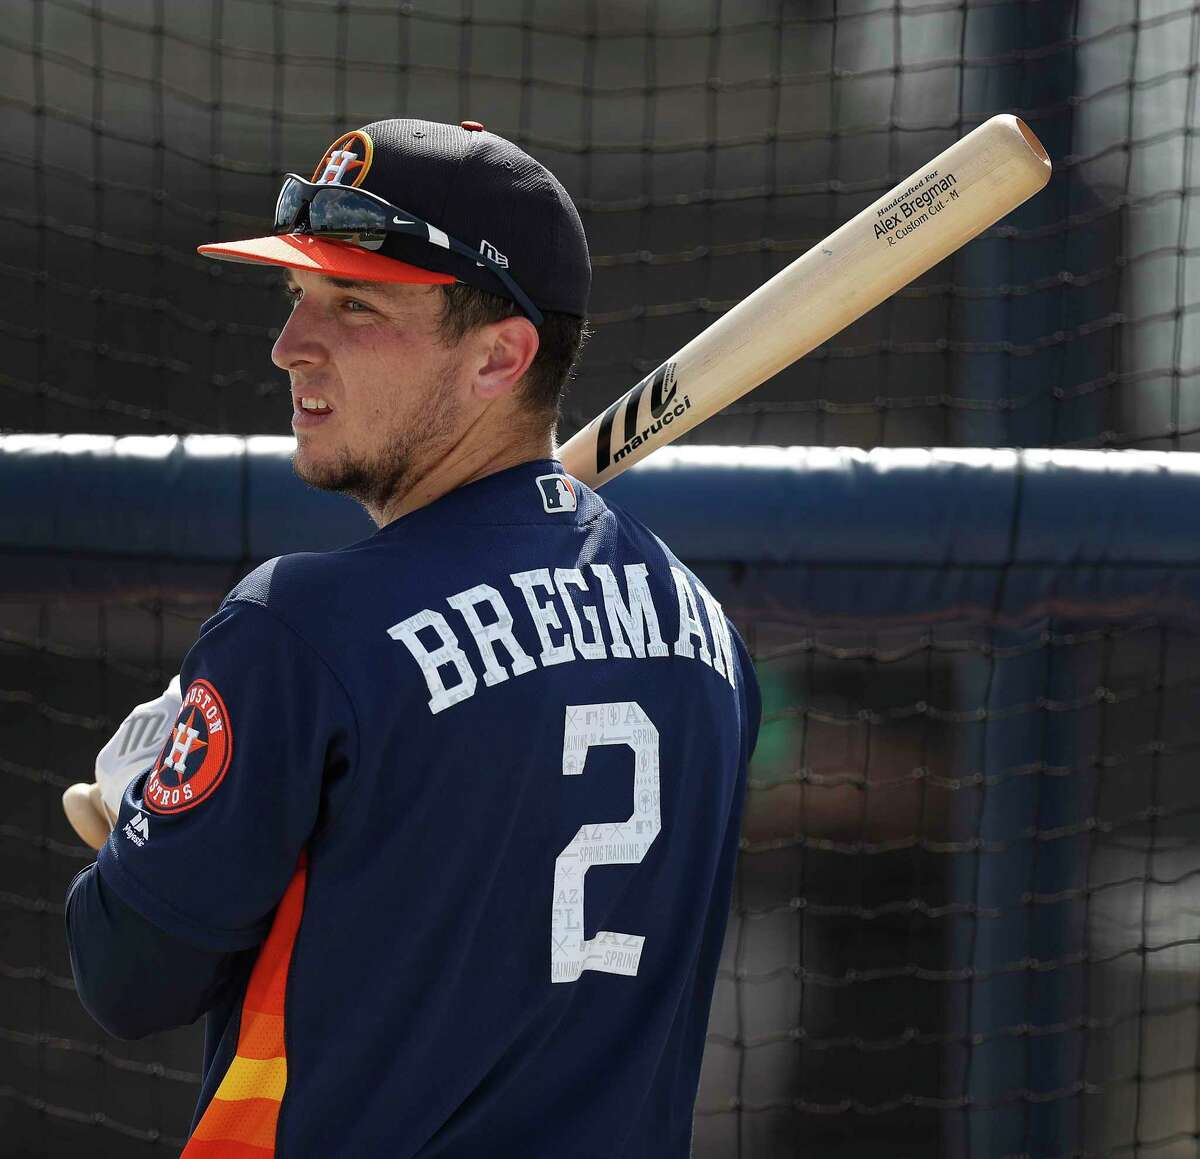 Houston Astros third baseman Alex Bregman (2) takes batting practice during spring training at The Ballpark of the Palm Beaches, in West Palm Beach, Florida, Sunday, February 19, 2017.